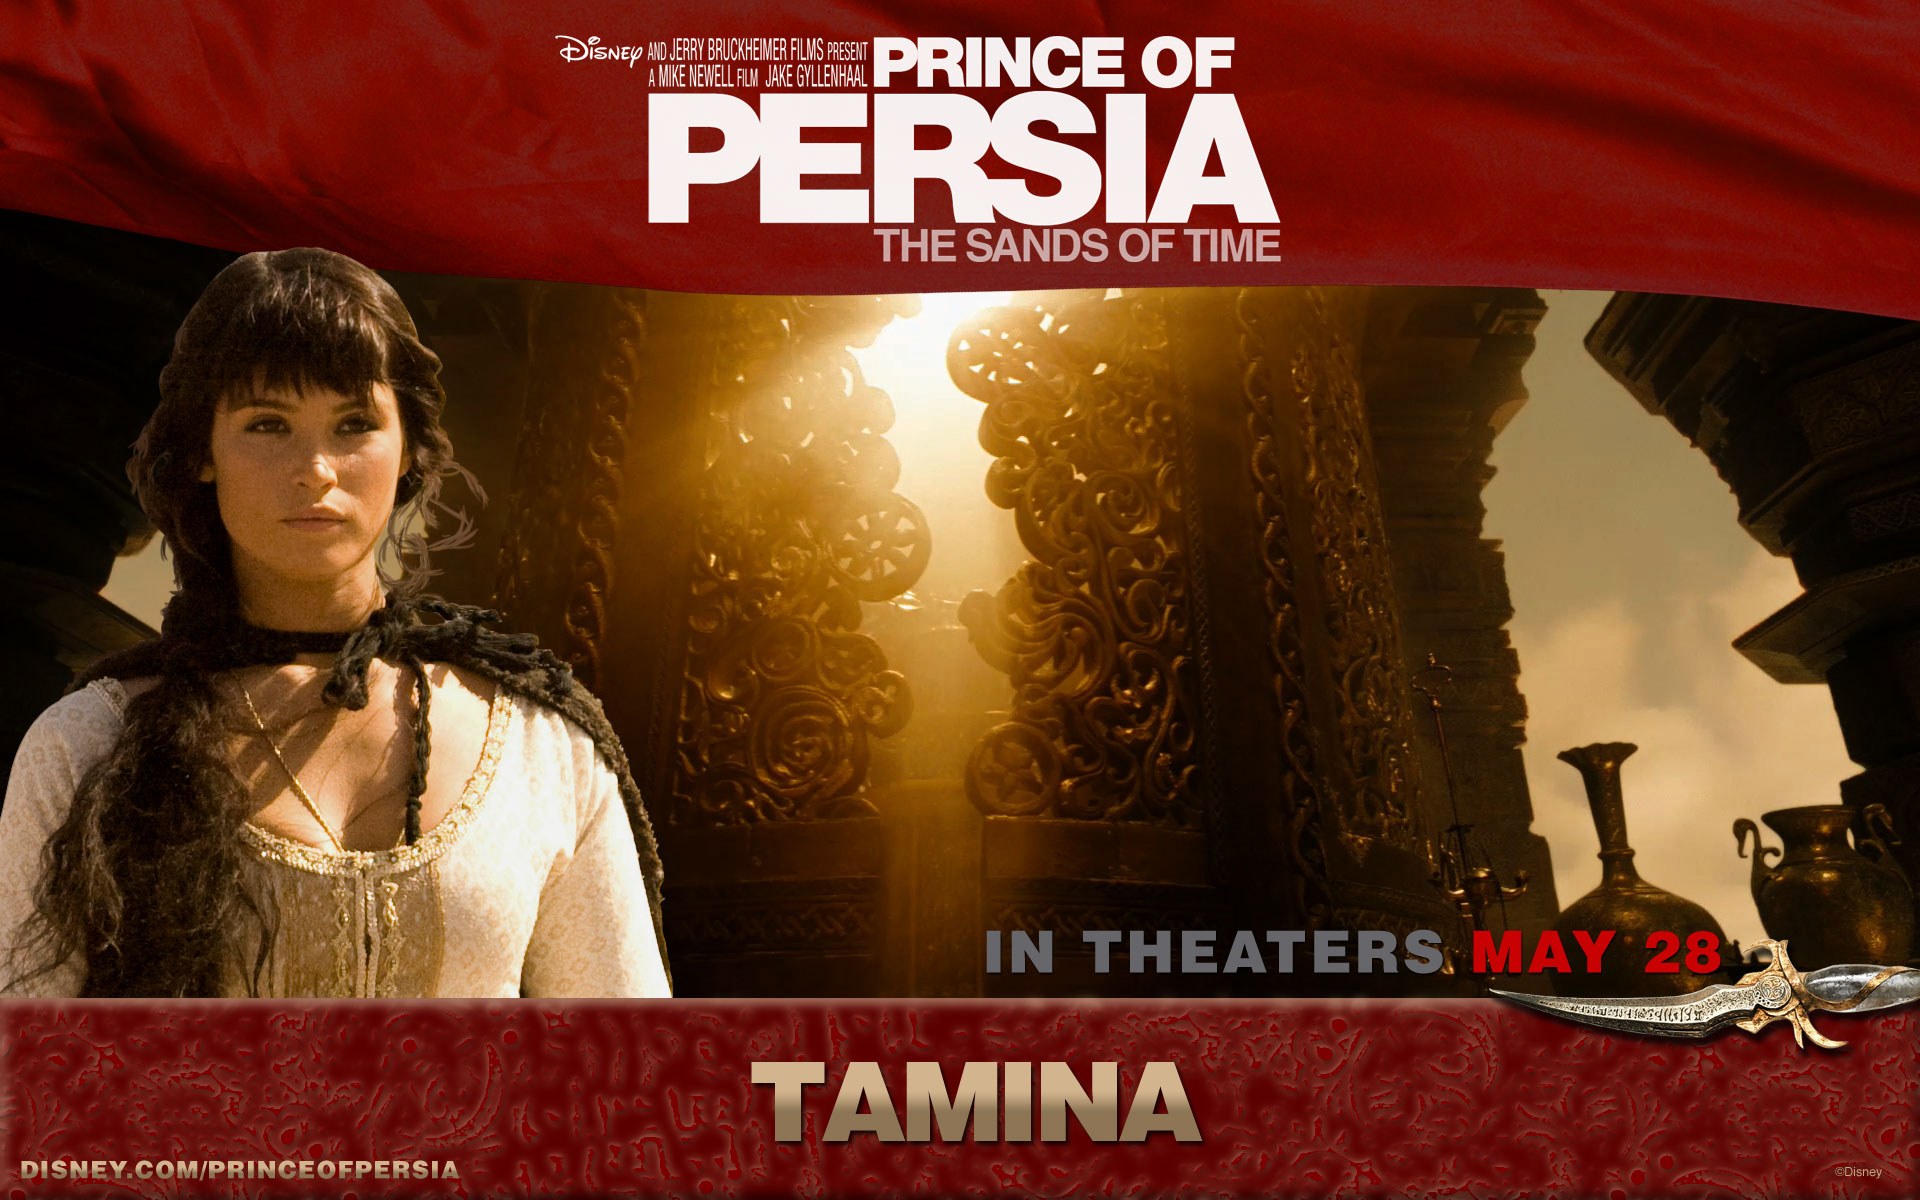 "Prince of Persia: The Sands of Time (Movie)" desktop wallpaper number 2 (1920 x 1200 pixels)